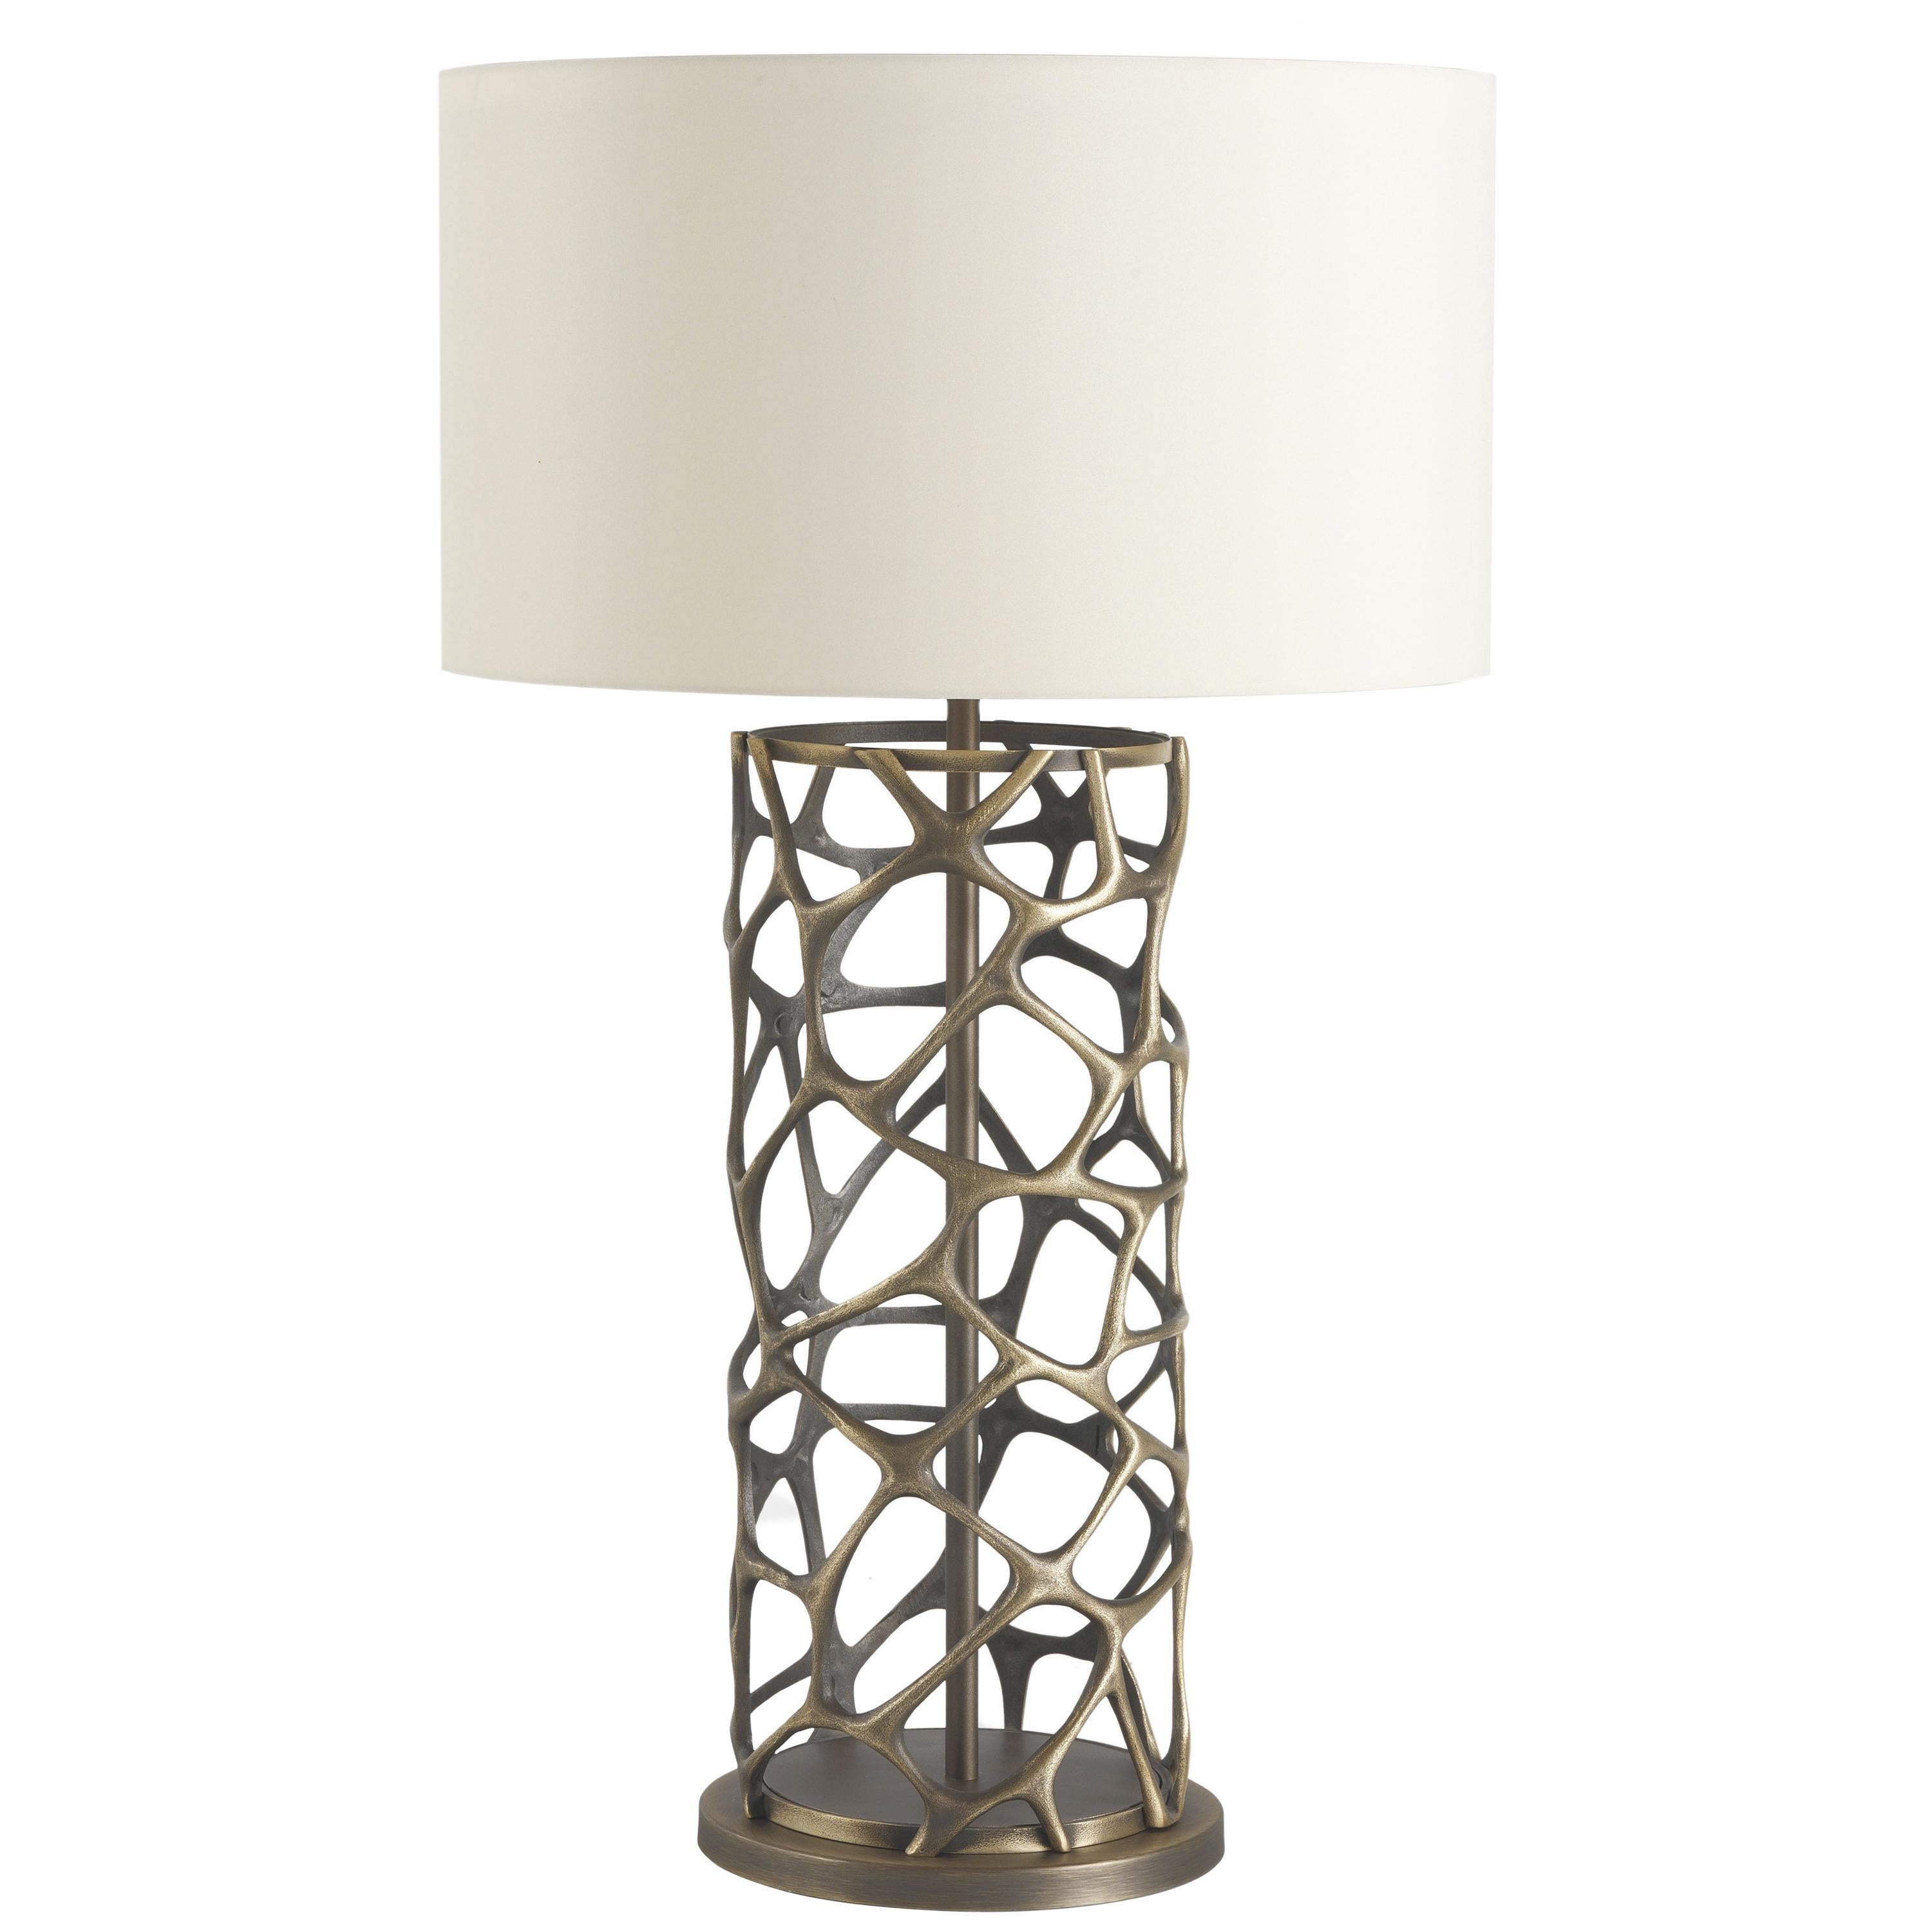 21st Century Sioraf.3 Table Lamp in Brass by Roberto Cavalli Home Interiors 